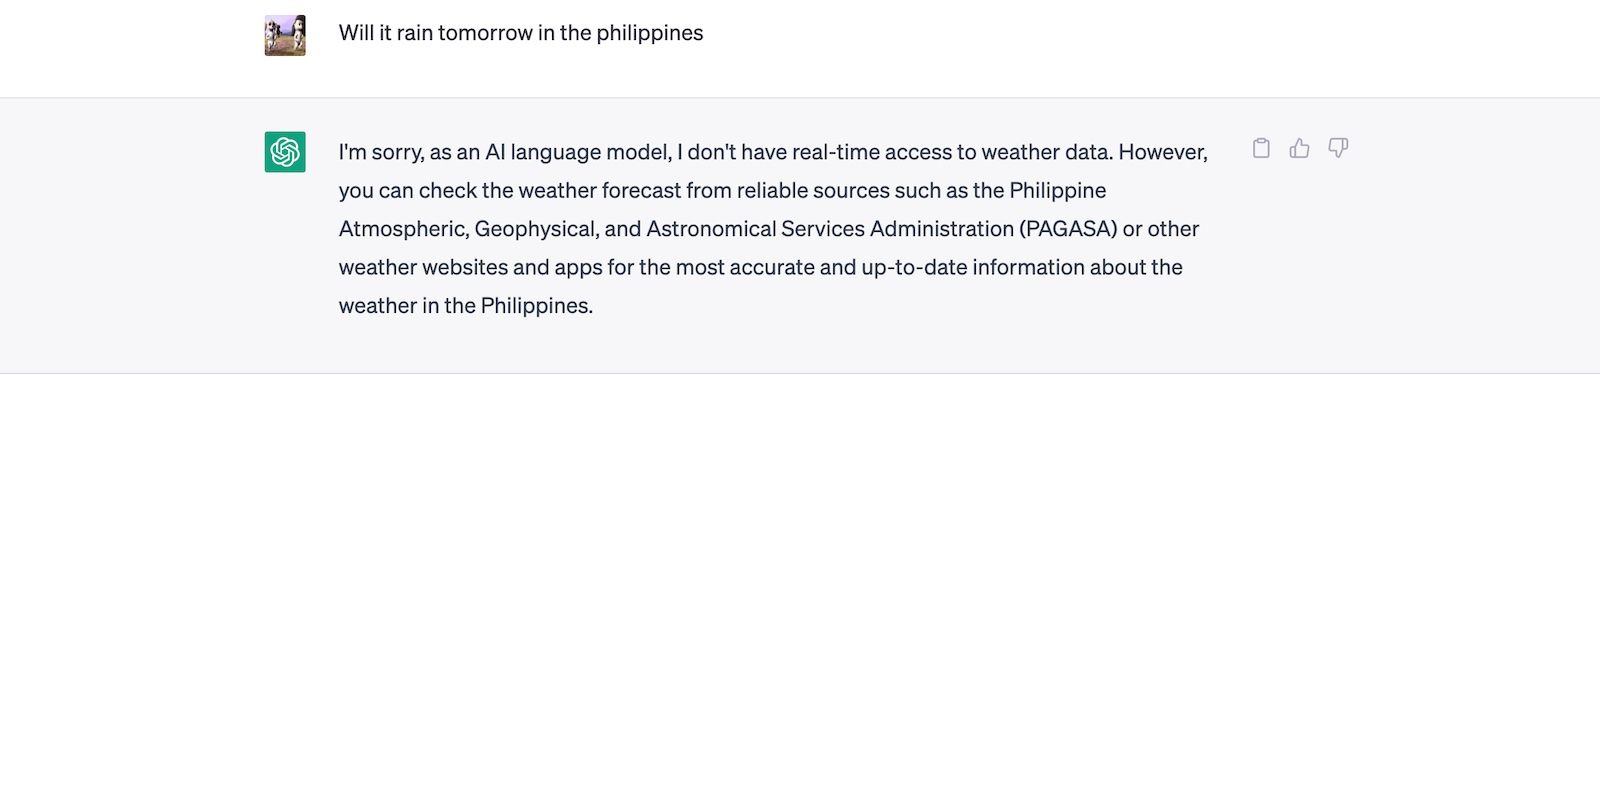 ChatGPT Can't Provide Weather Update Because It's Not Connected to the Internet